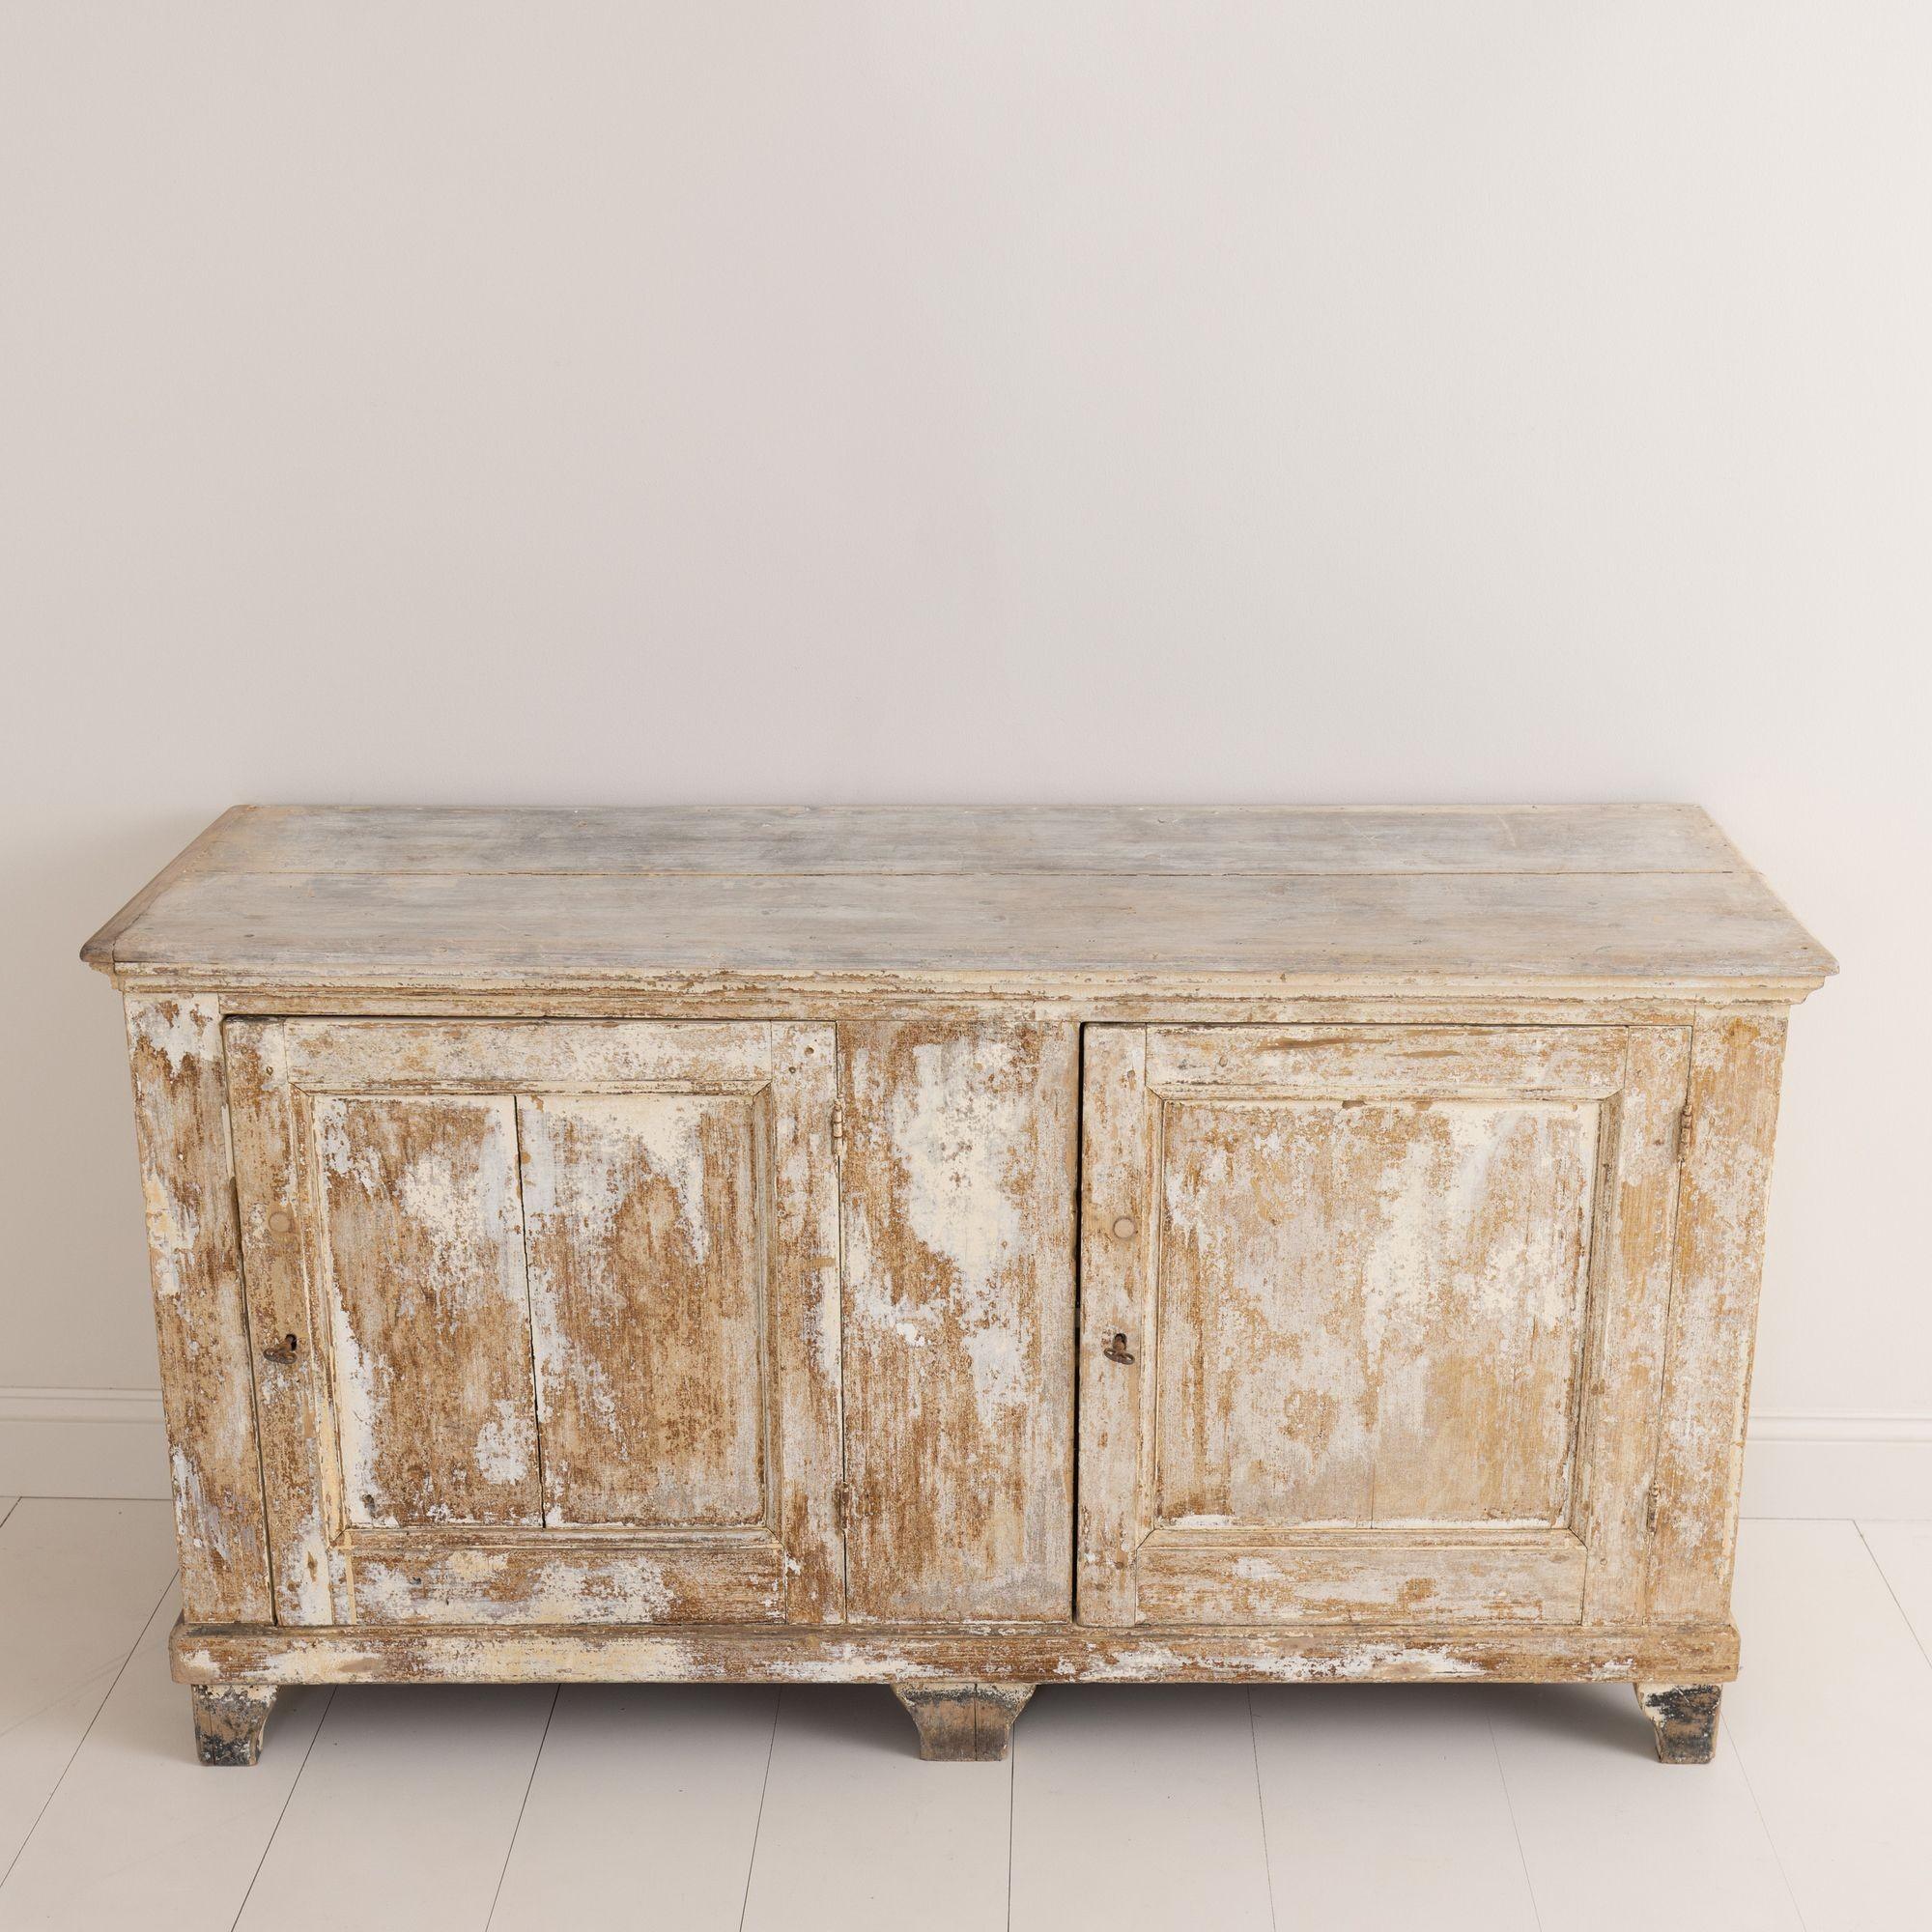 19th Century 19th C. French Provincial Chic Enfilade in Original Paint